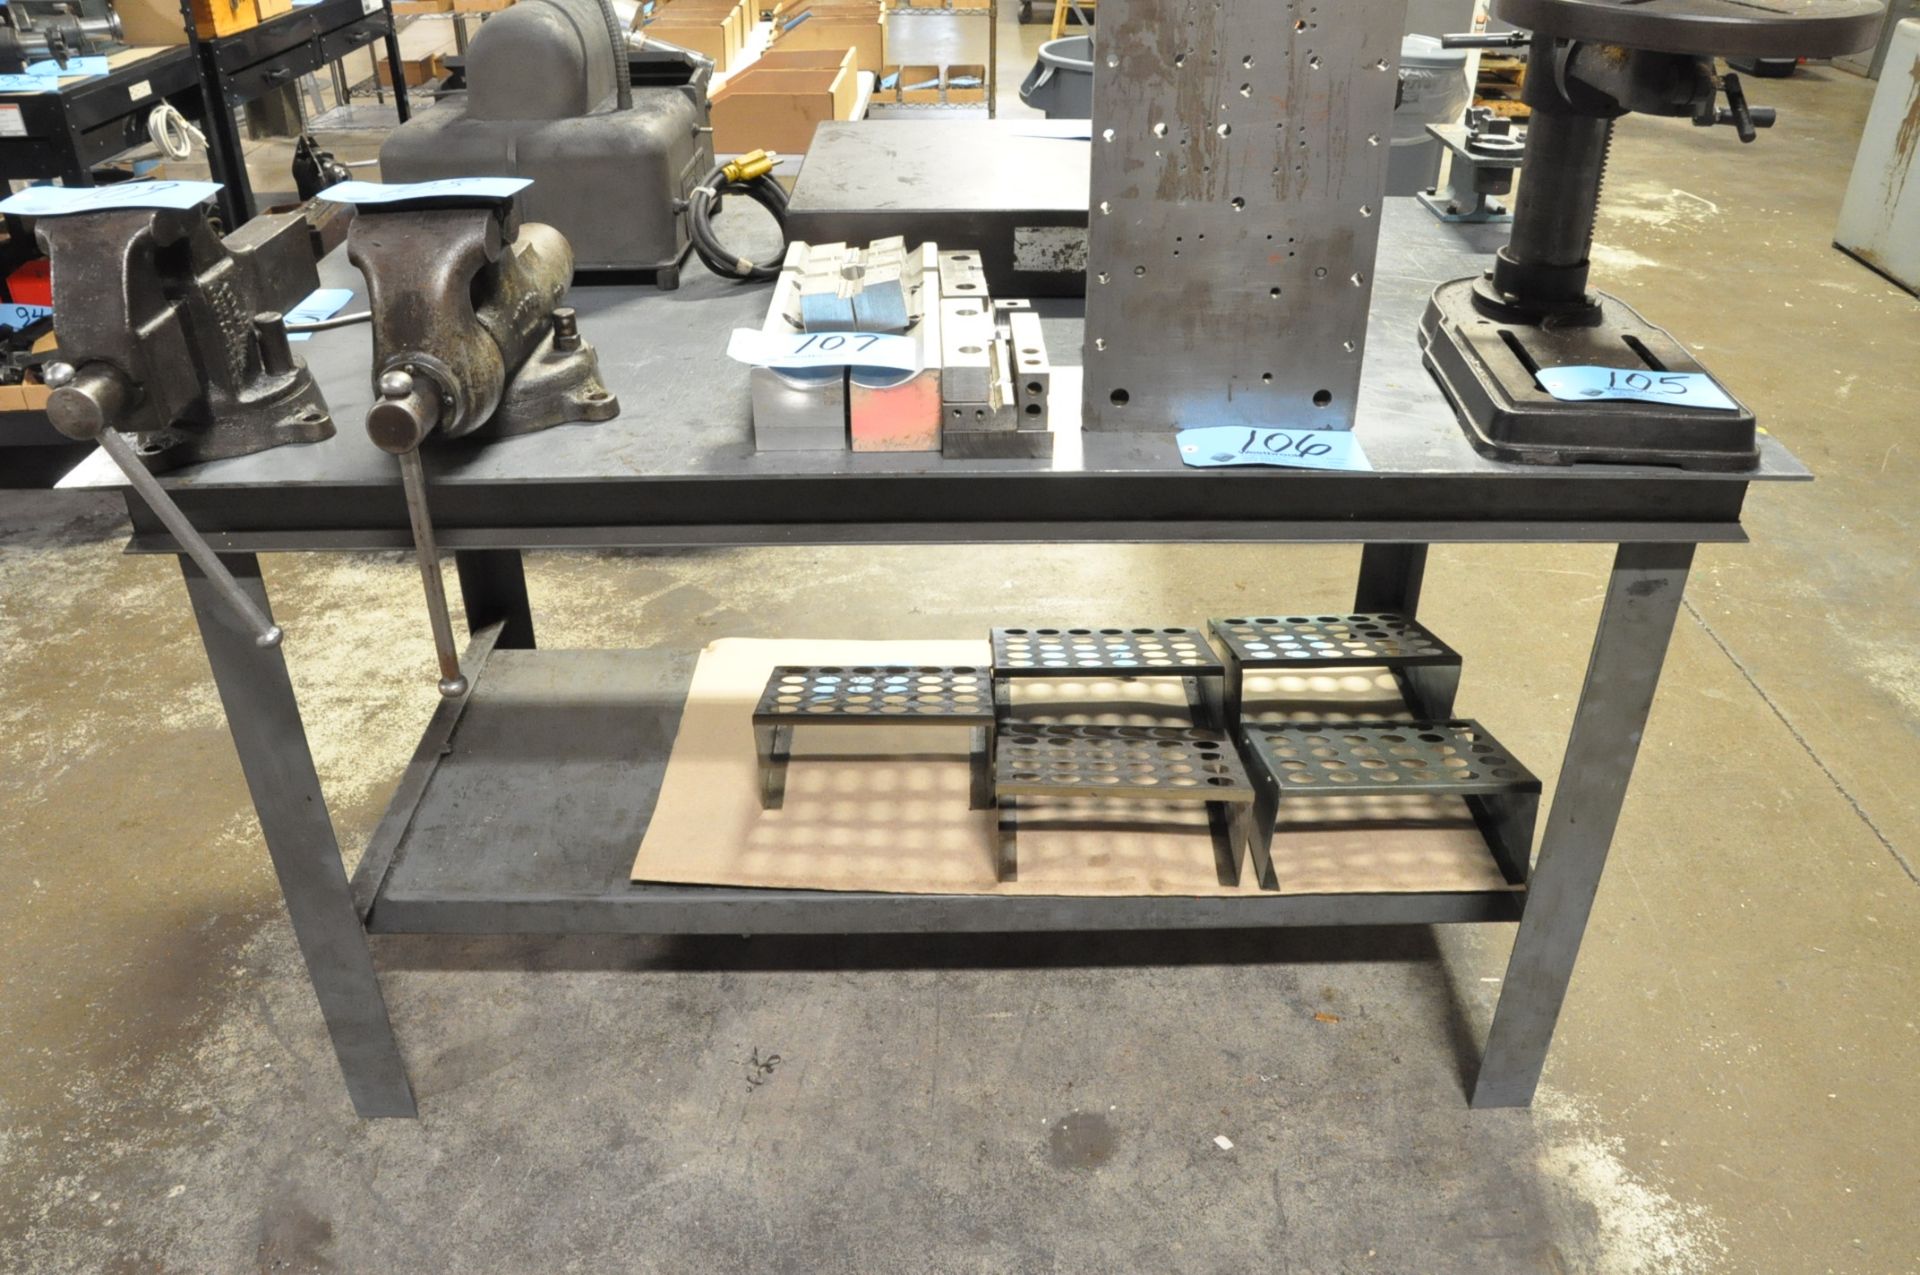 36" x 60" x 1/4" Thick Steel Work Table, (Contents Not Included), (Not to Be Removed Until Empty)